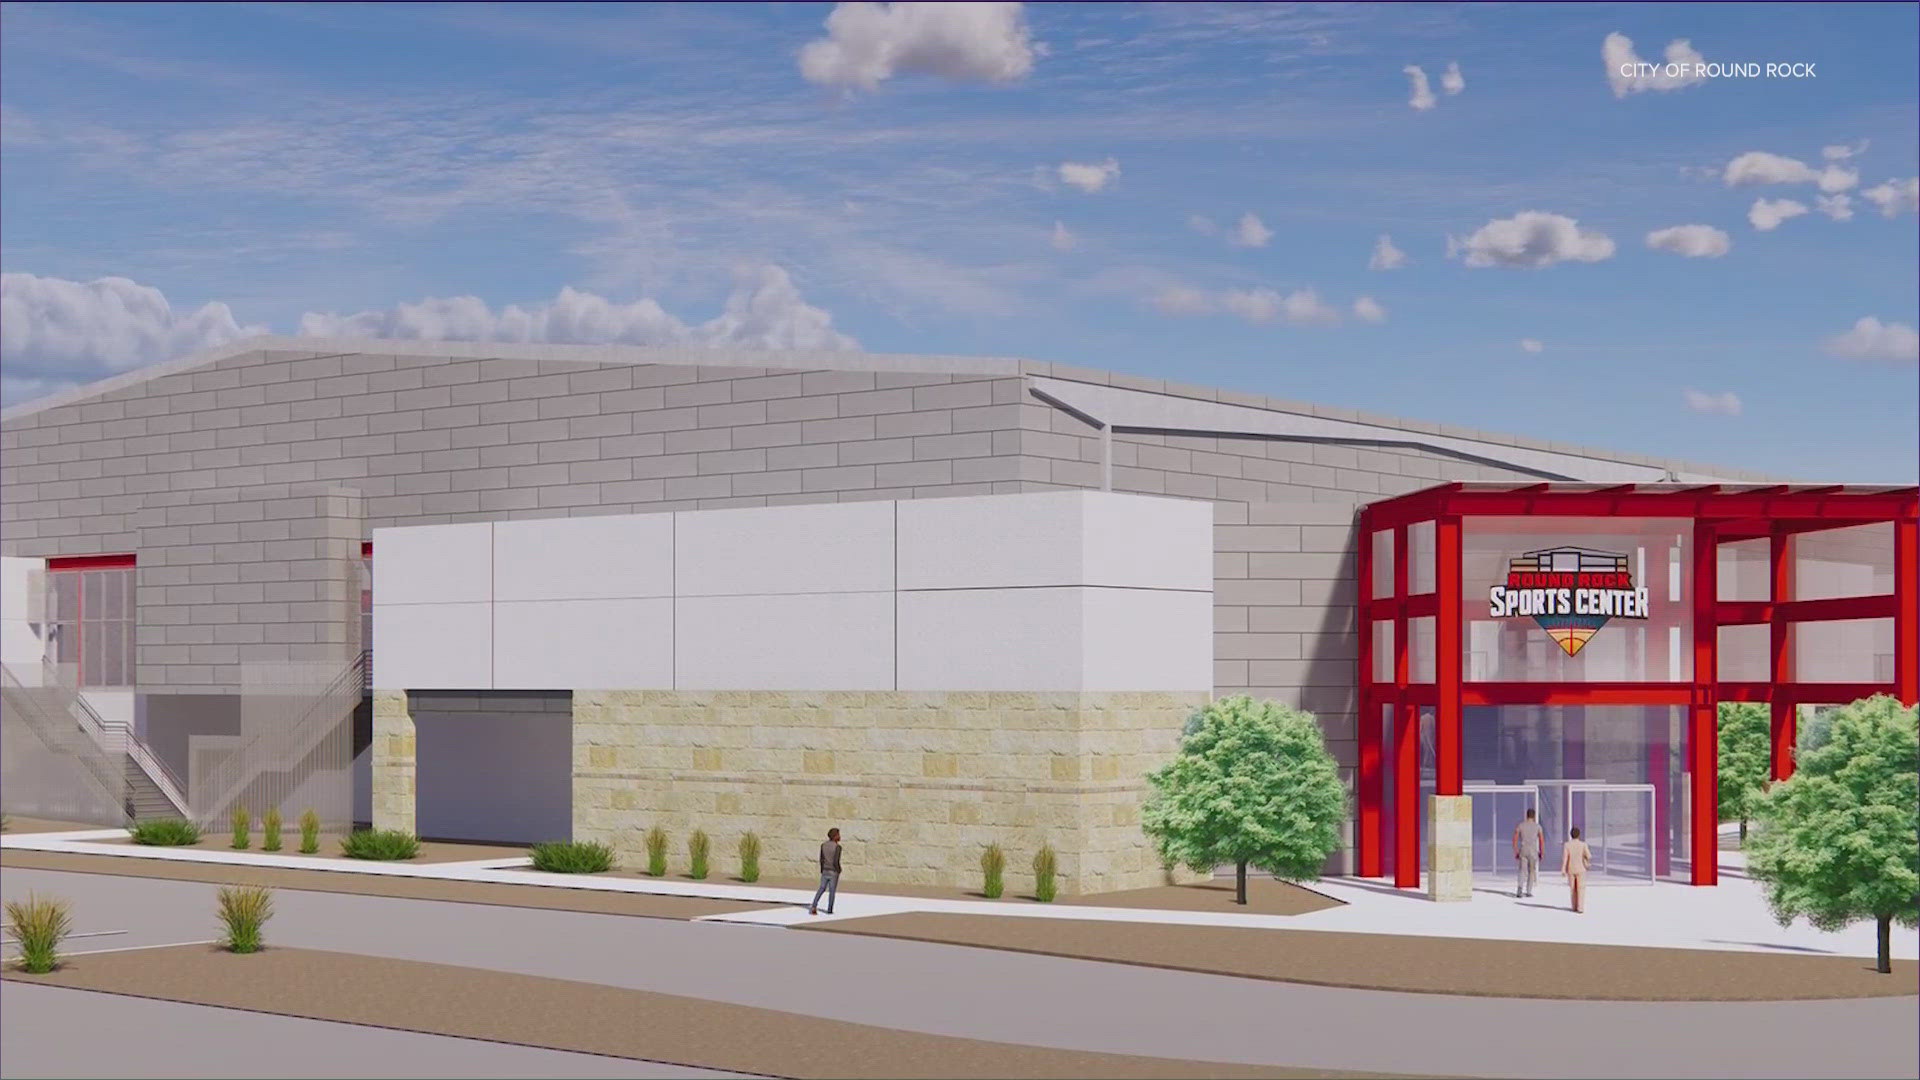 Construction is underway to expand the city of Round Rock's Sports Center.